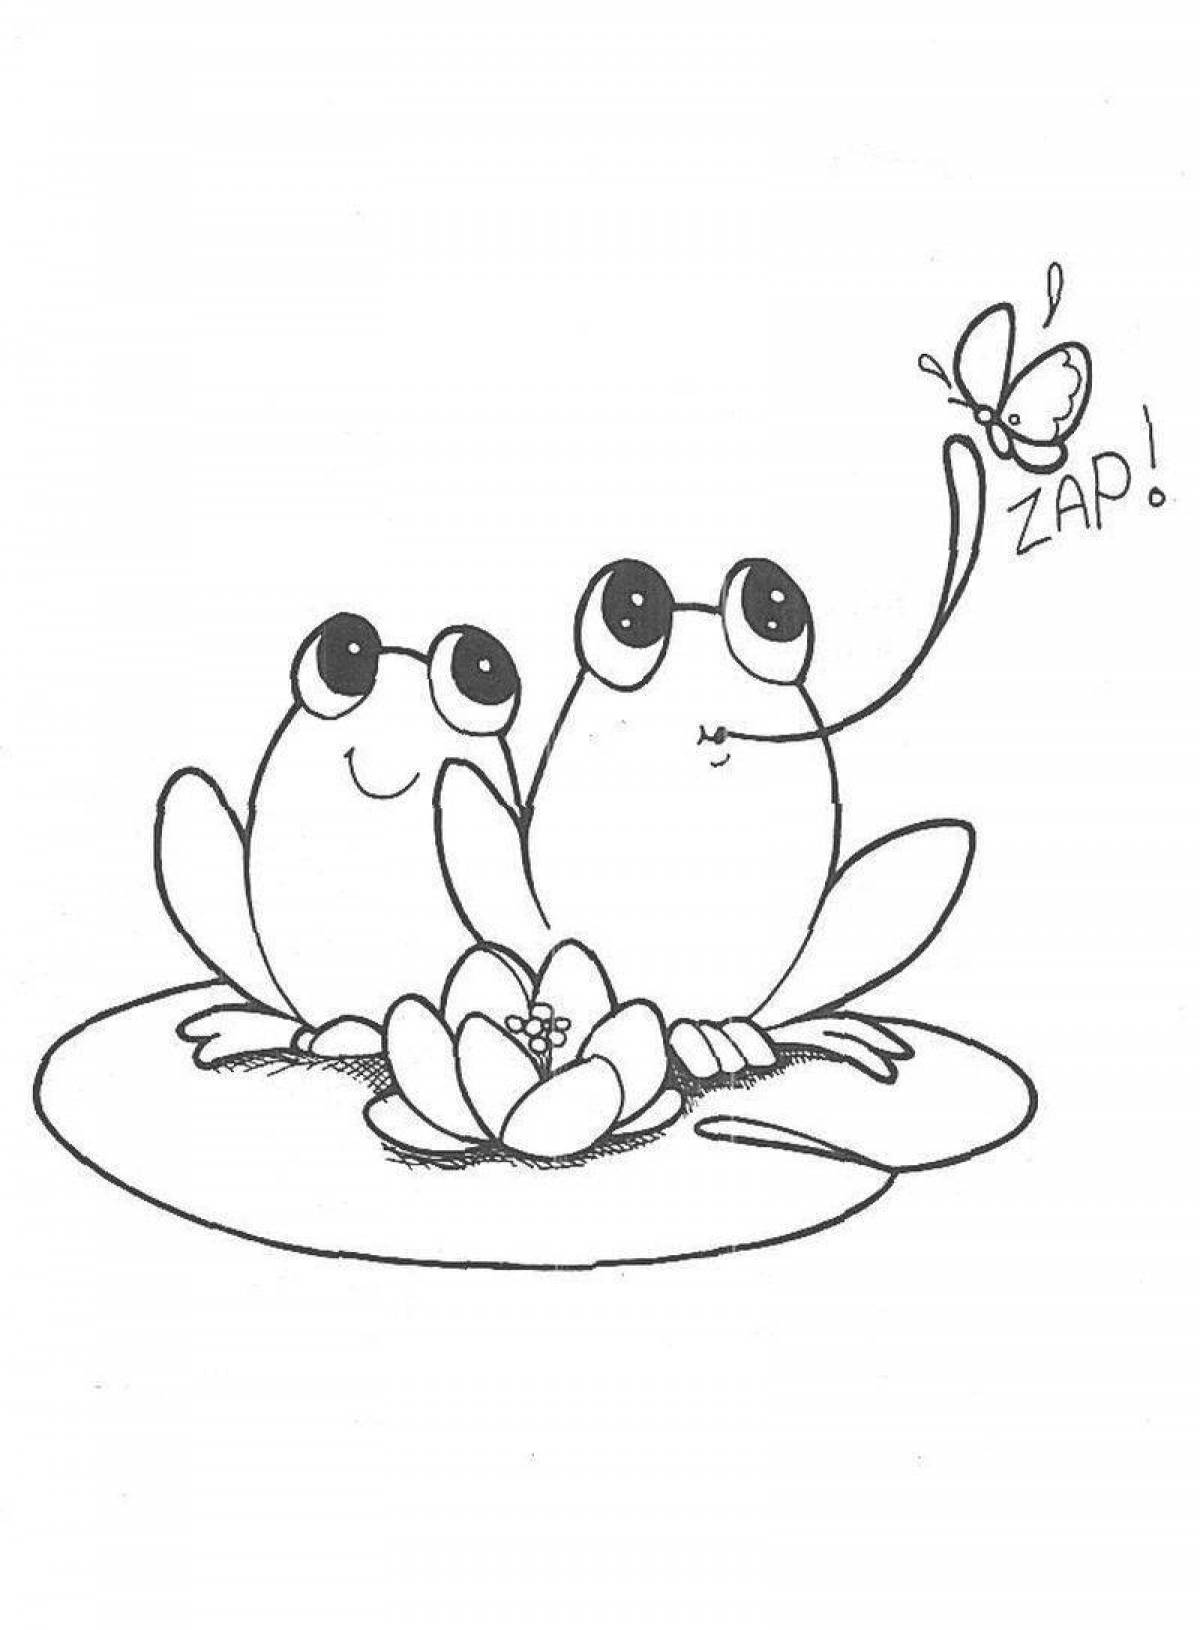 Chipper frog coloring page